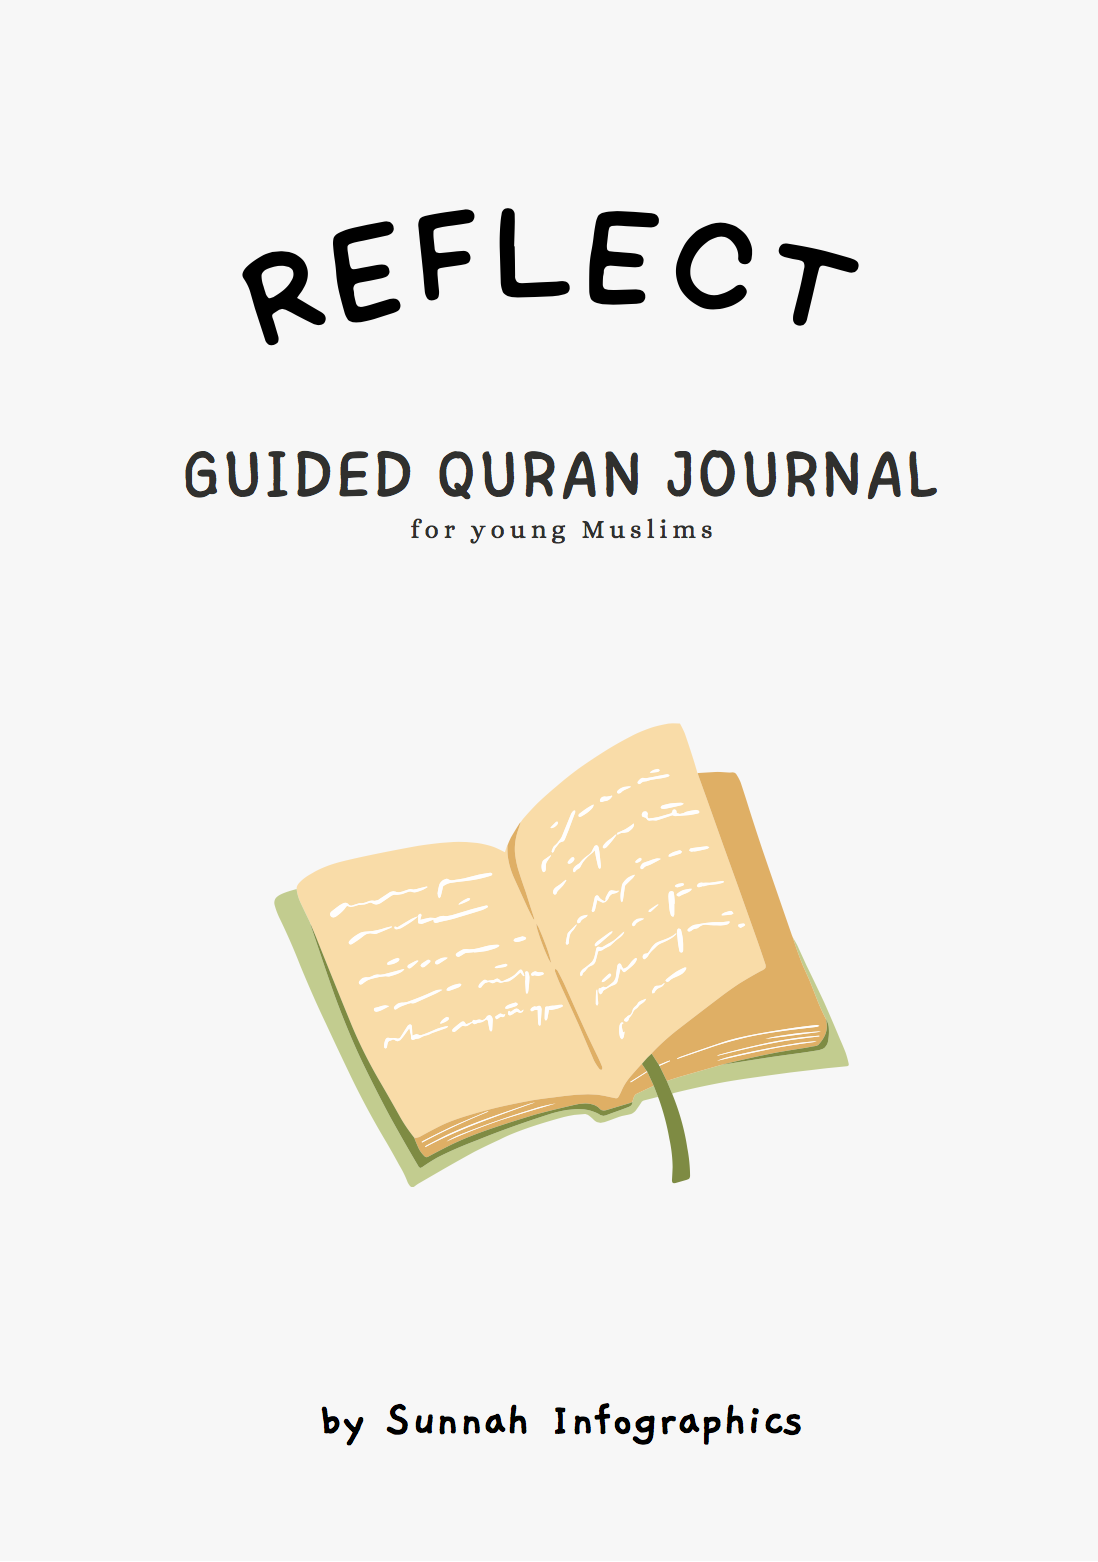 This beautifully designed Qur'an Journal is specially designed for young learners. It is a collection of carefully selected ayat from the Glorious Qur'an.